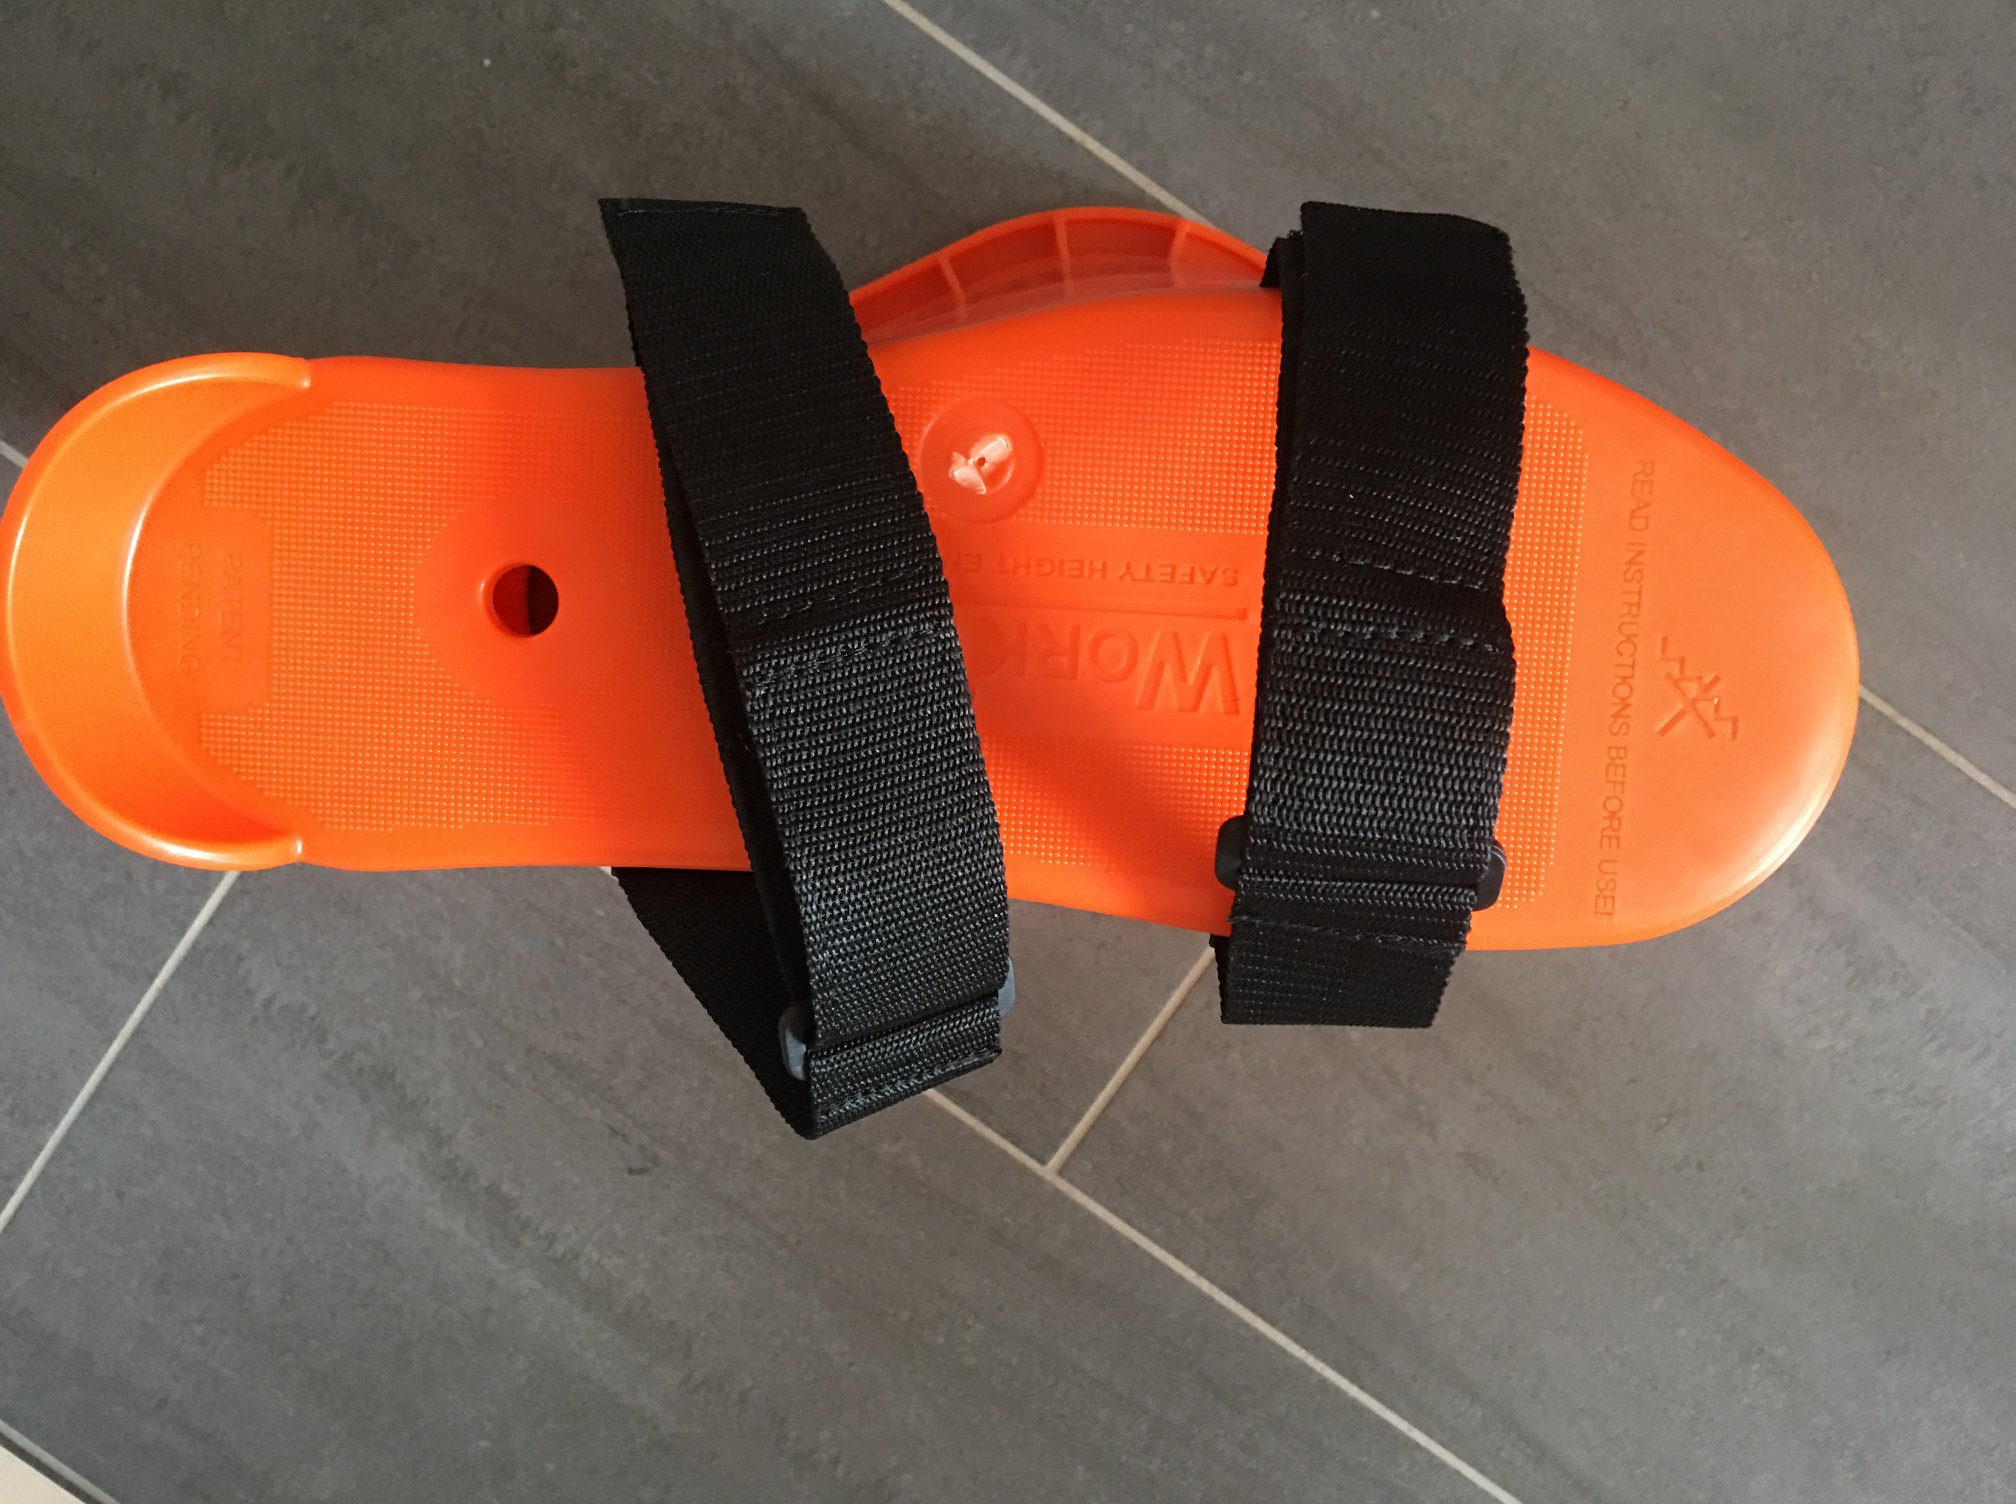 Long Term WorkTall Height Enhancing Safety Boots Review - Plasterers News